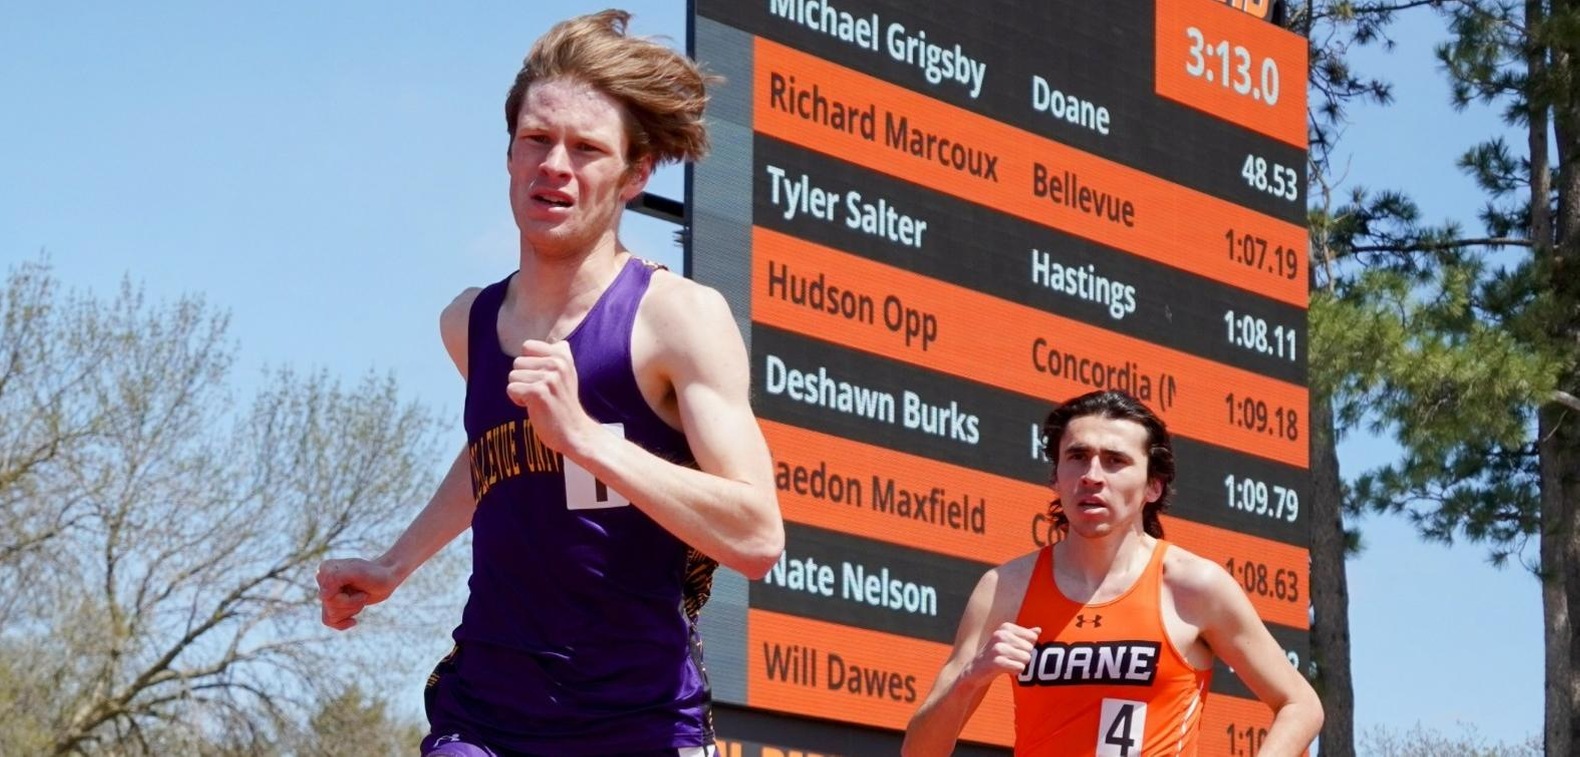 Richard Marcoux captured the title in the 1,500-meter run.